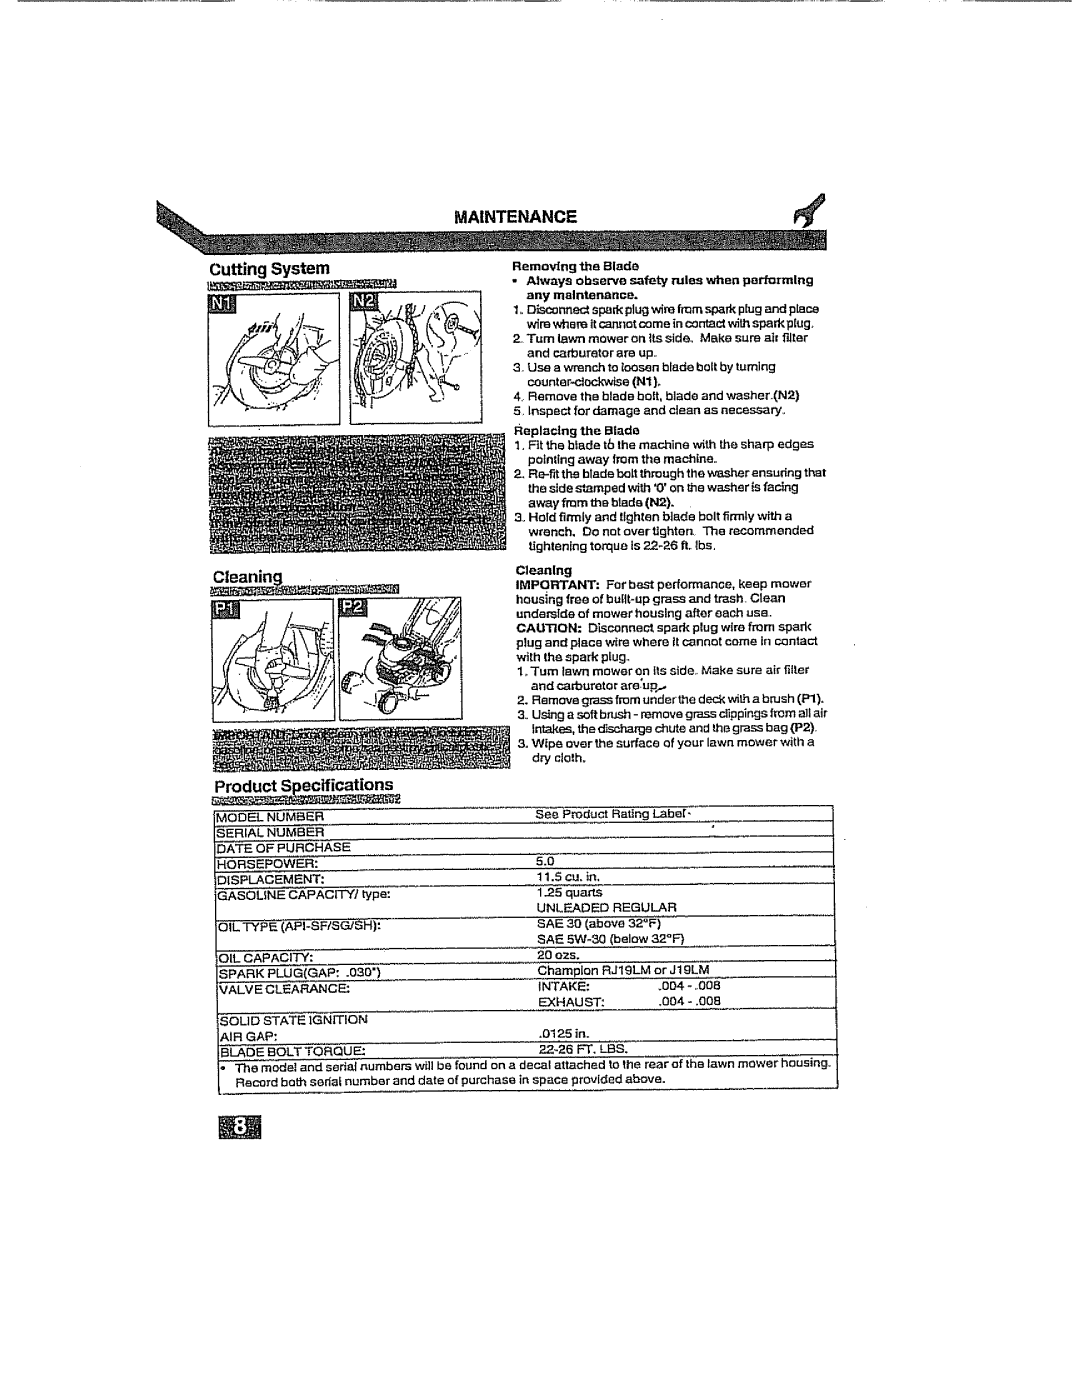 Craftsman 917.38919 owner manual Maintenance, Cutting System, Product S, ecifications 